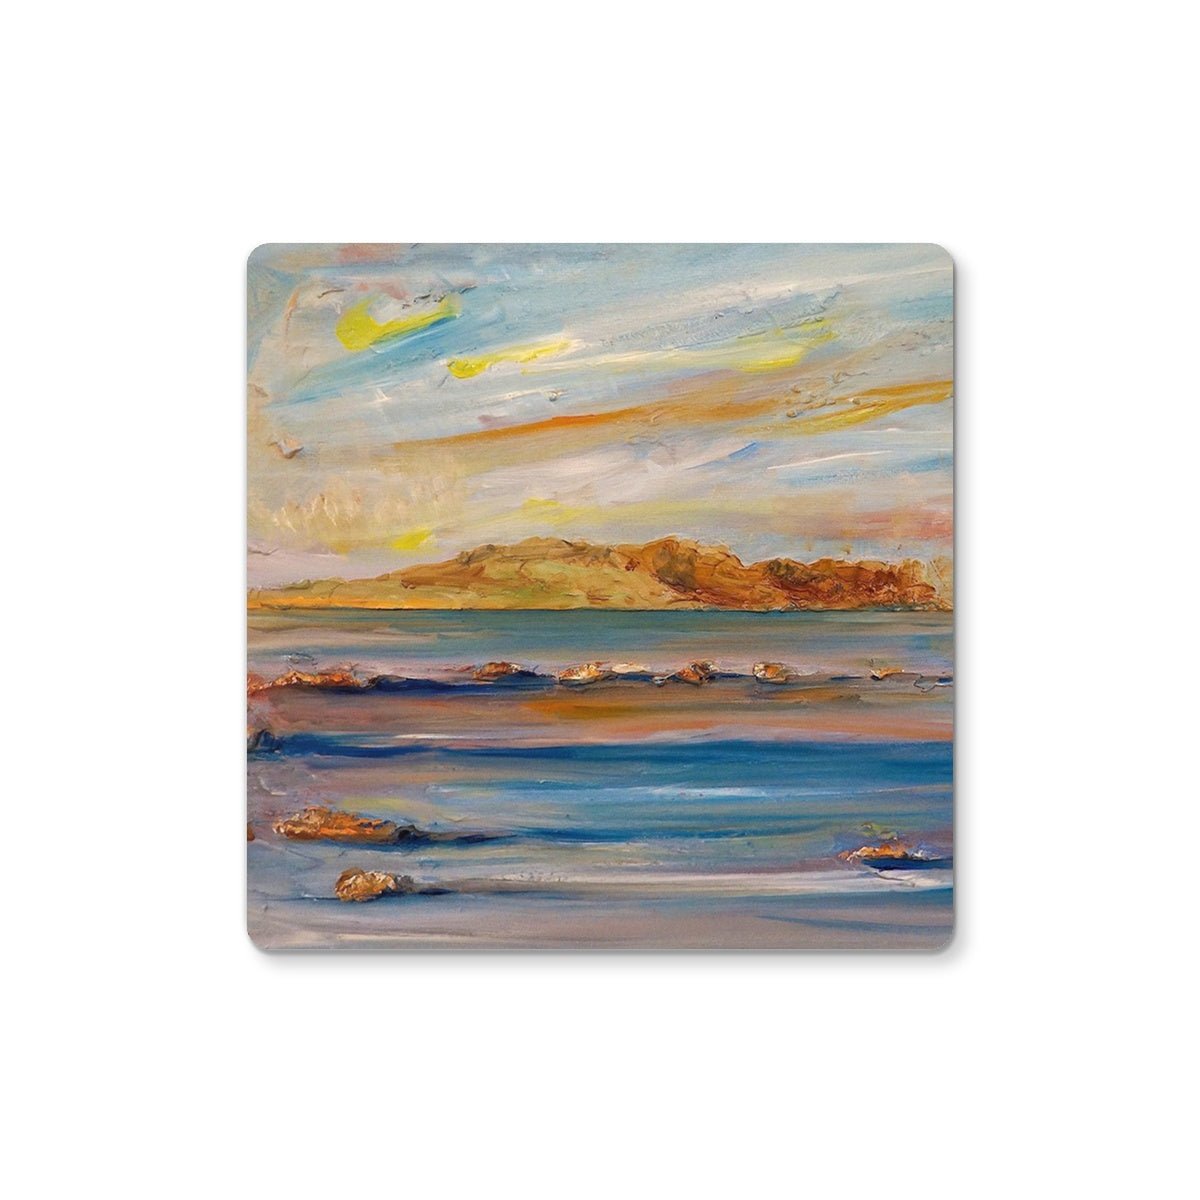 Tiree Dawn Art Gifts Coaster-Coasters-Hebridean Islands Art Gallery-4 Coasters-Paintings, Prints, Homeware, Art Gifts From Scotland By Scottish Artist Kevin Hunter